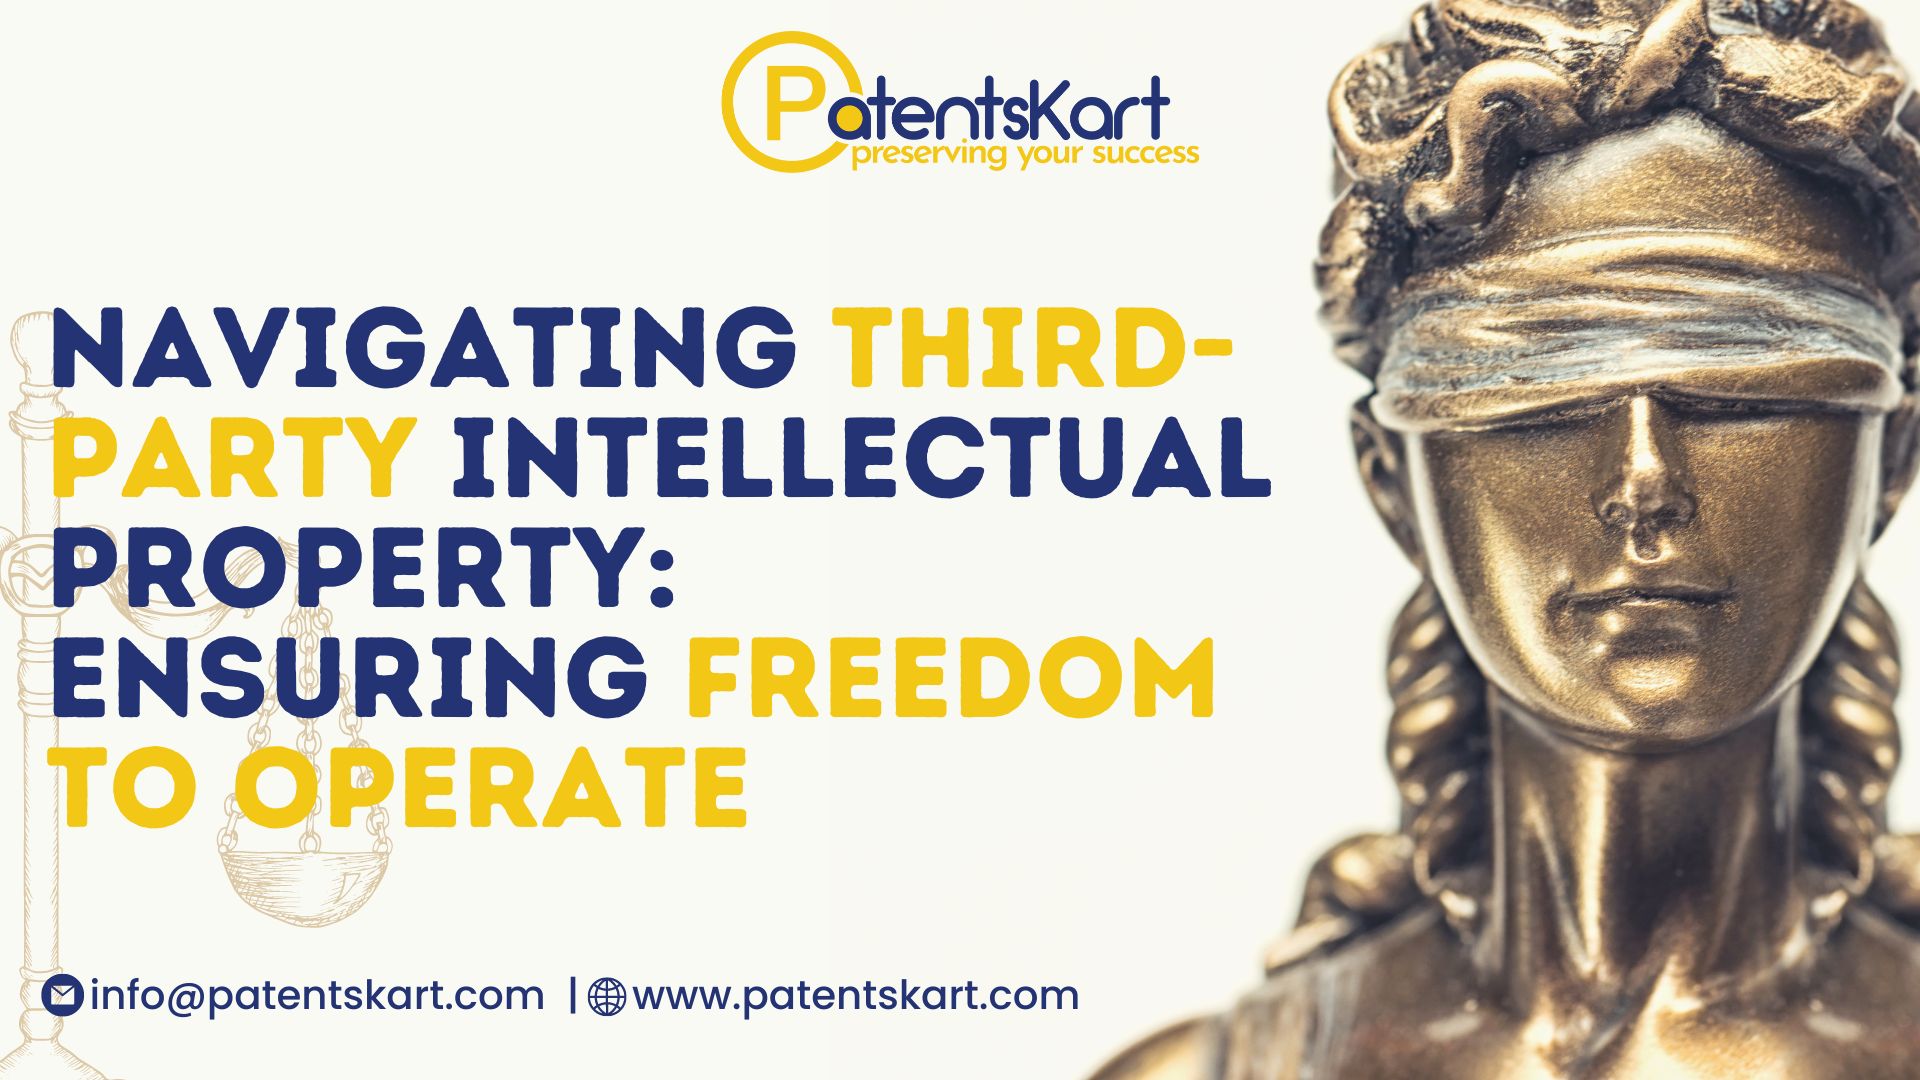 Navigating Third-Party Intellectual Property: Ensuring Freedom to Operate